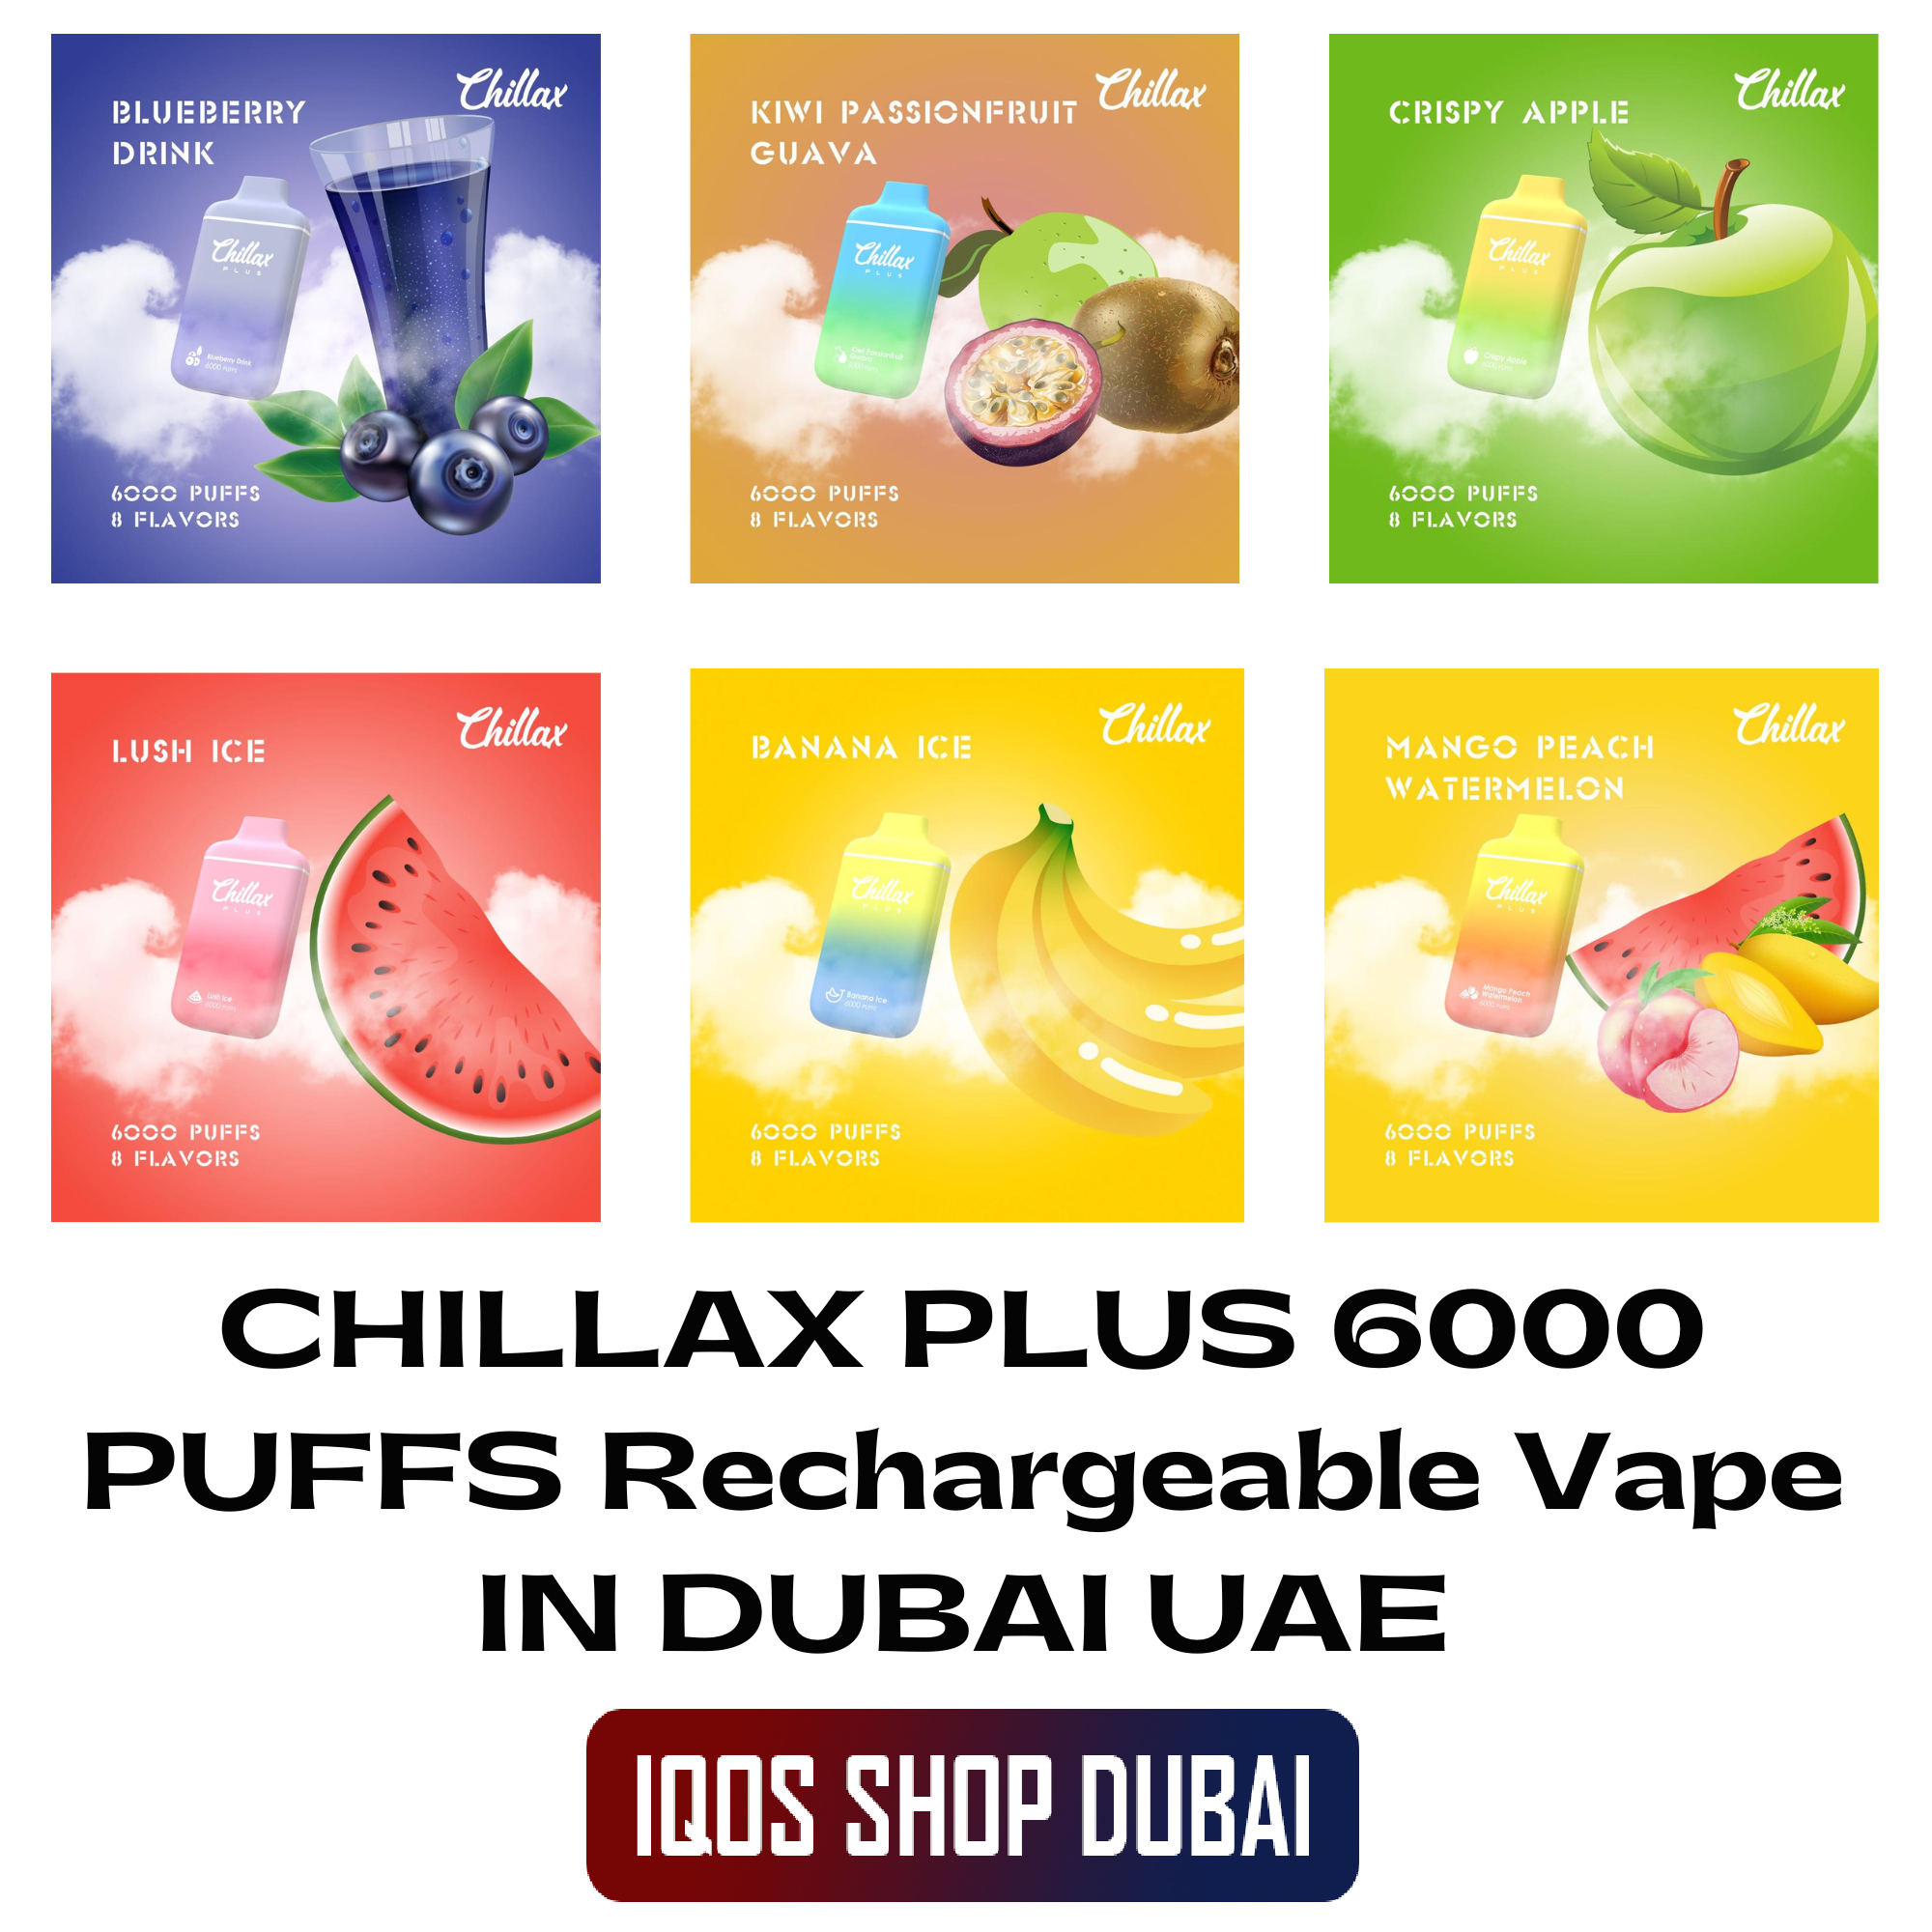 CHILLAX PLUS 6000 PUFFS Rechargeable Vape IN UAE